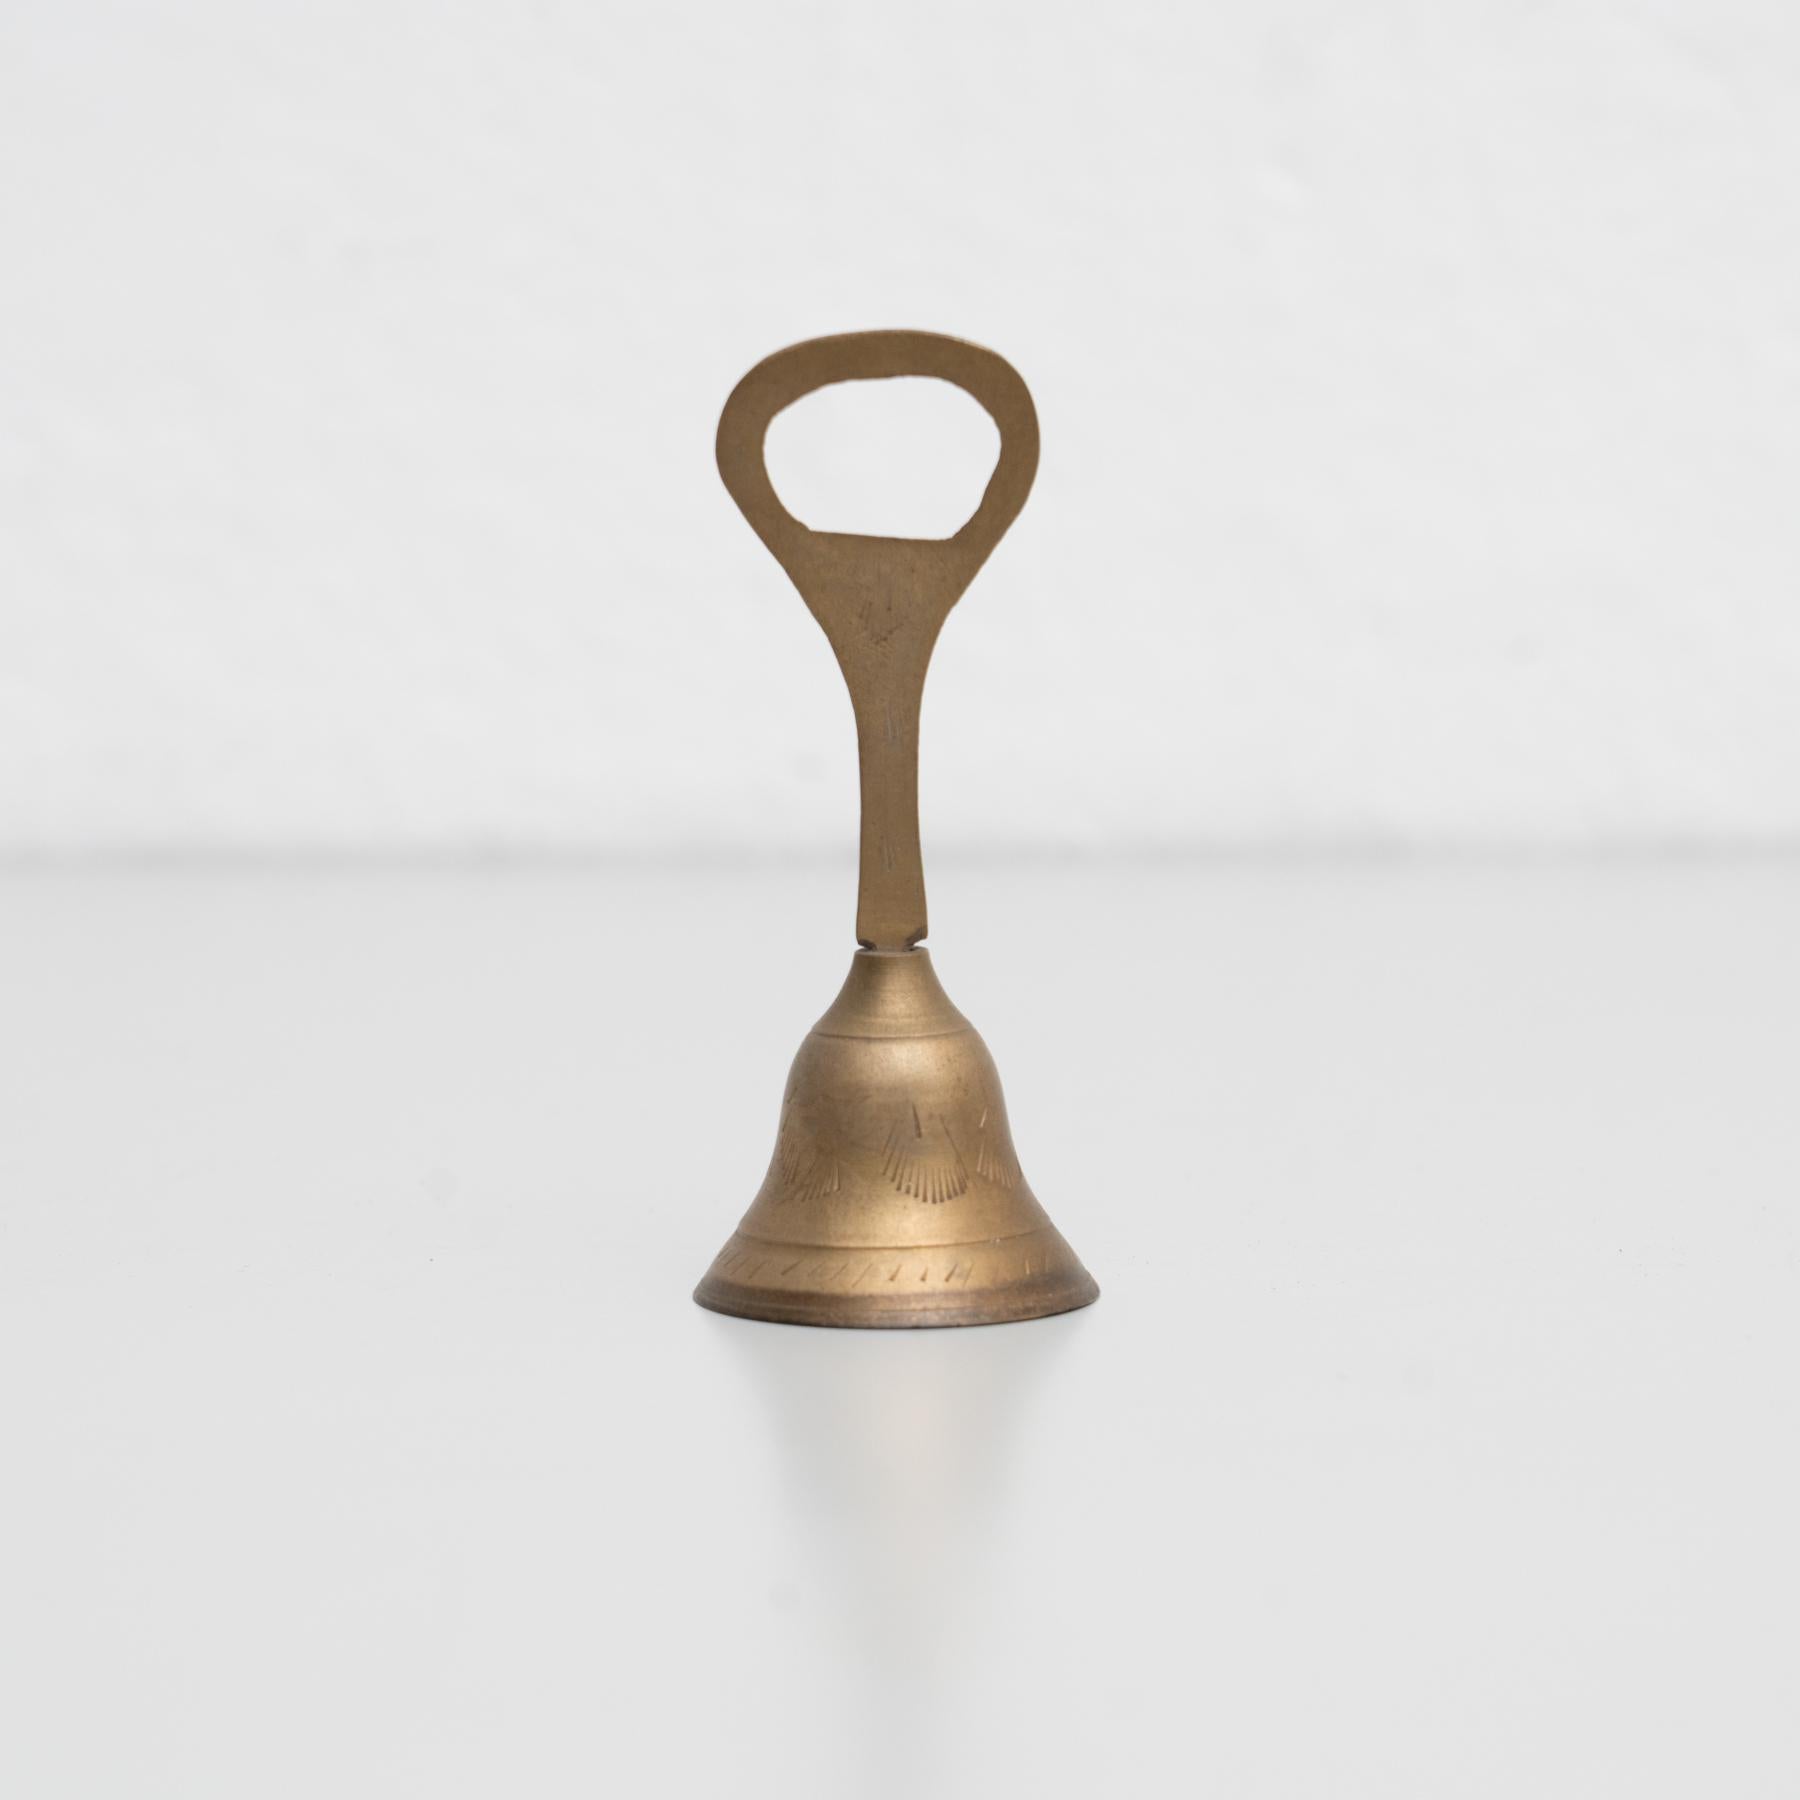 Traditional Spanish Rustic Bronze Hand Bell Bottle Opener, circa 1950 For Sale 1